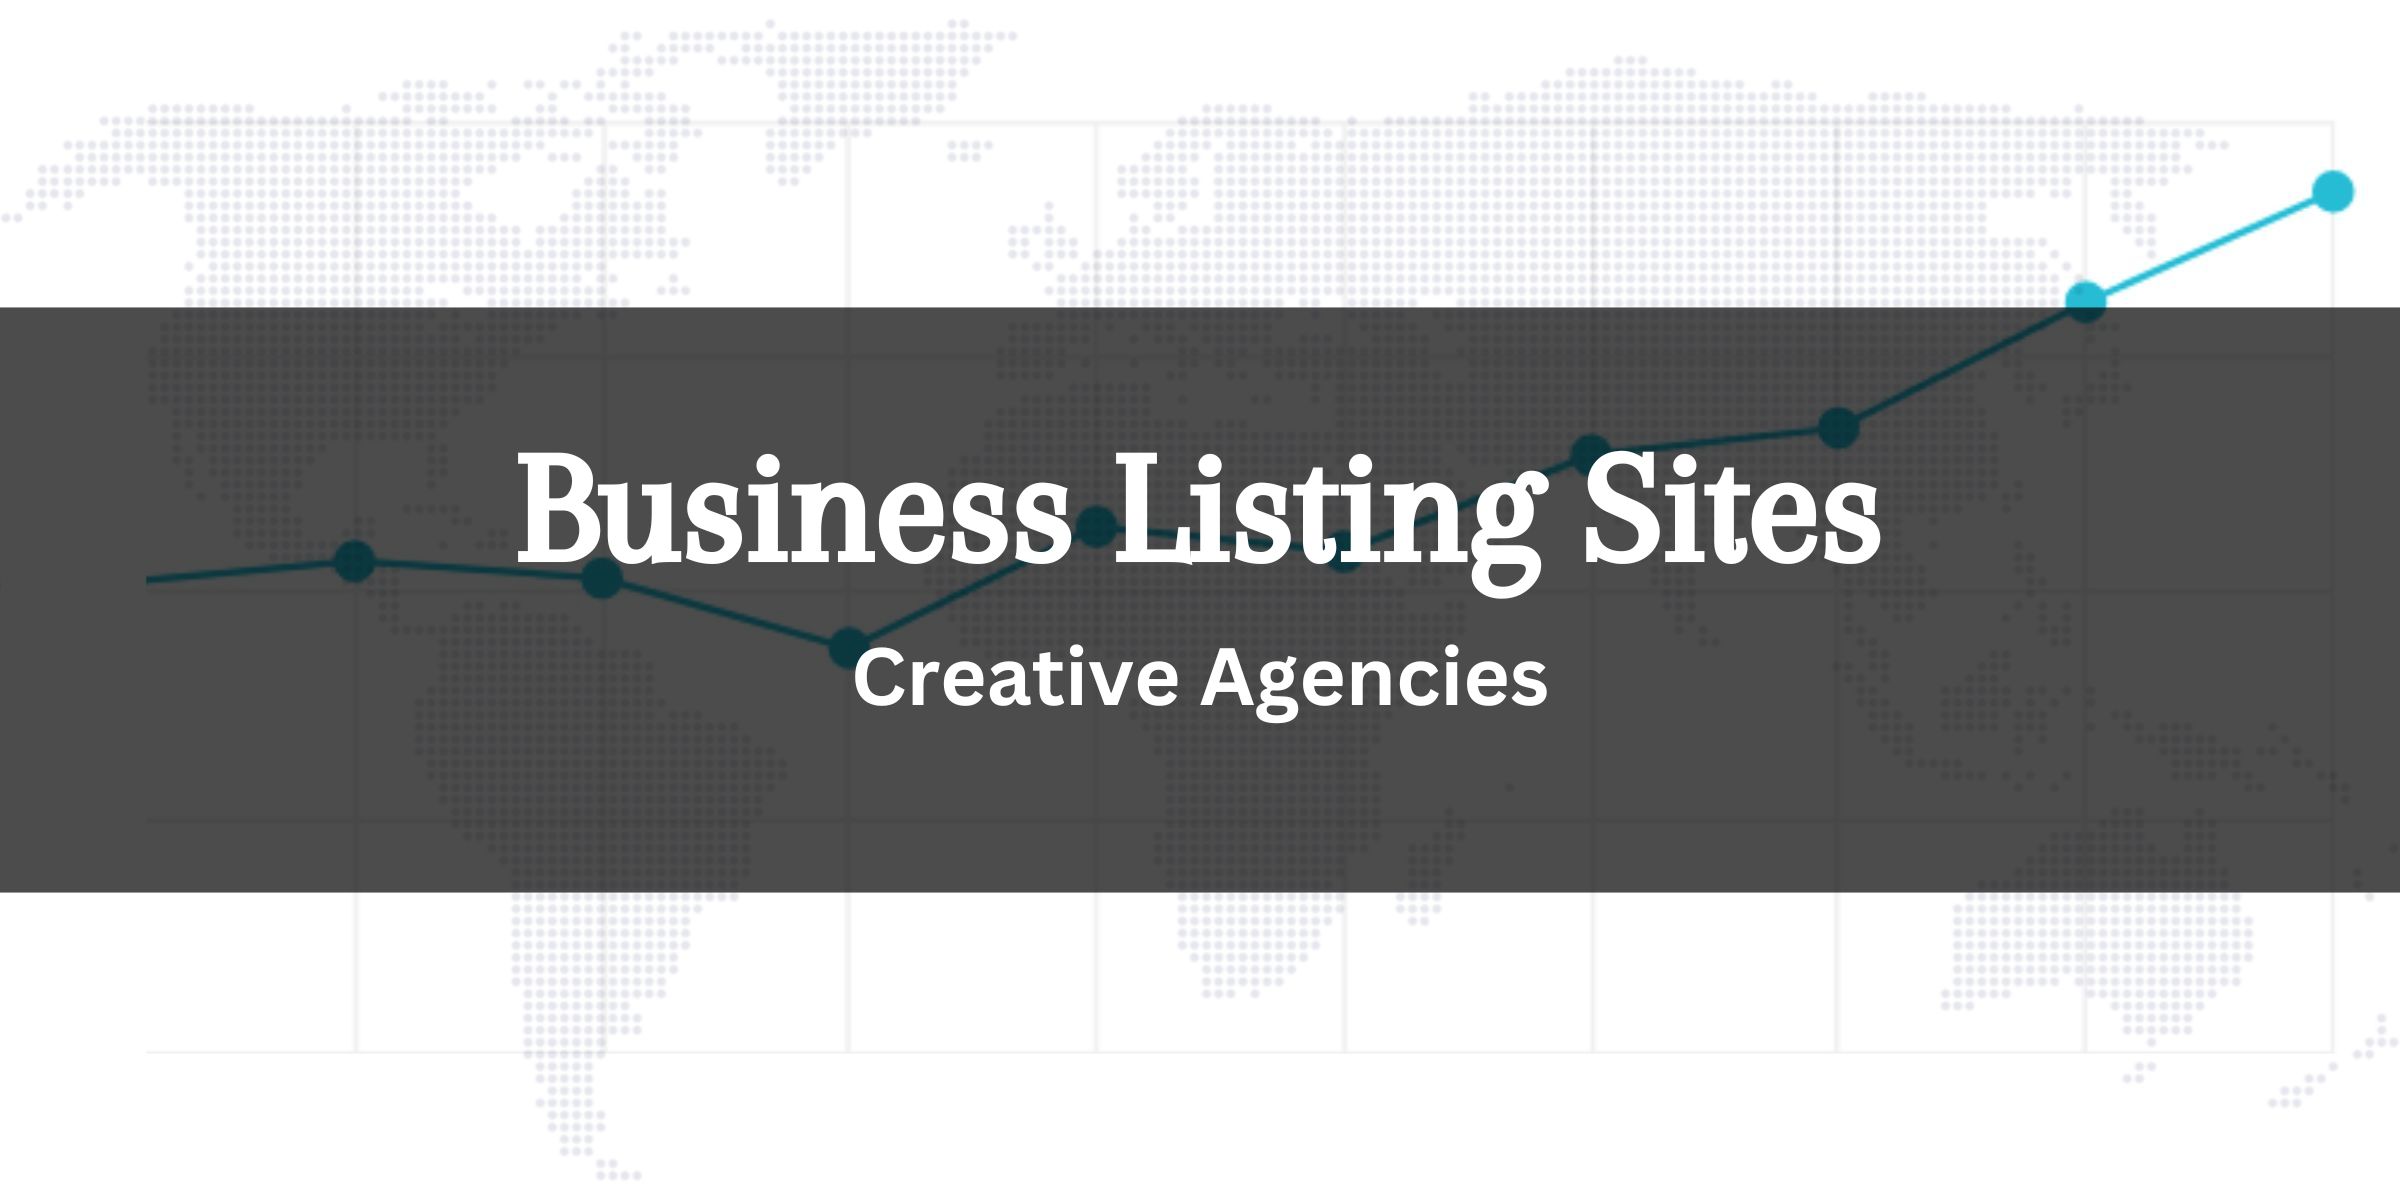 Top Business Listing Sites for Creative Agencies